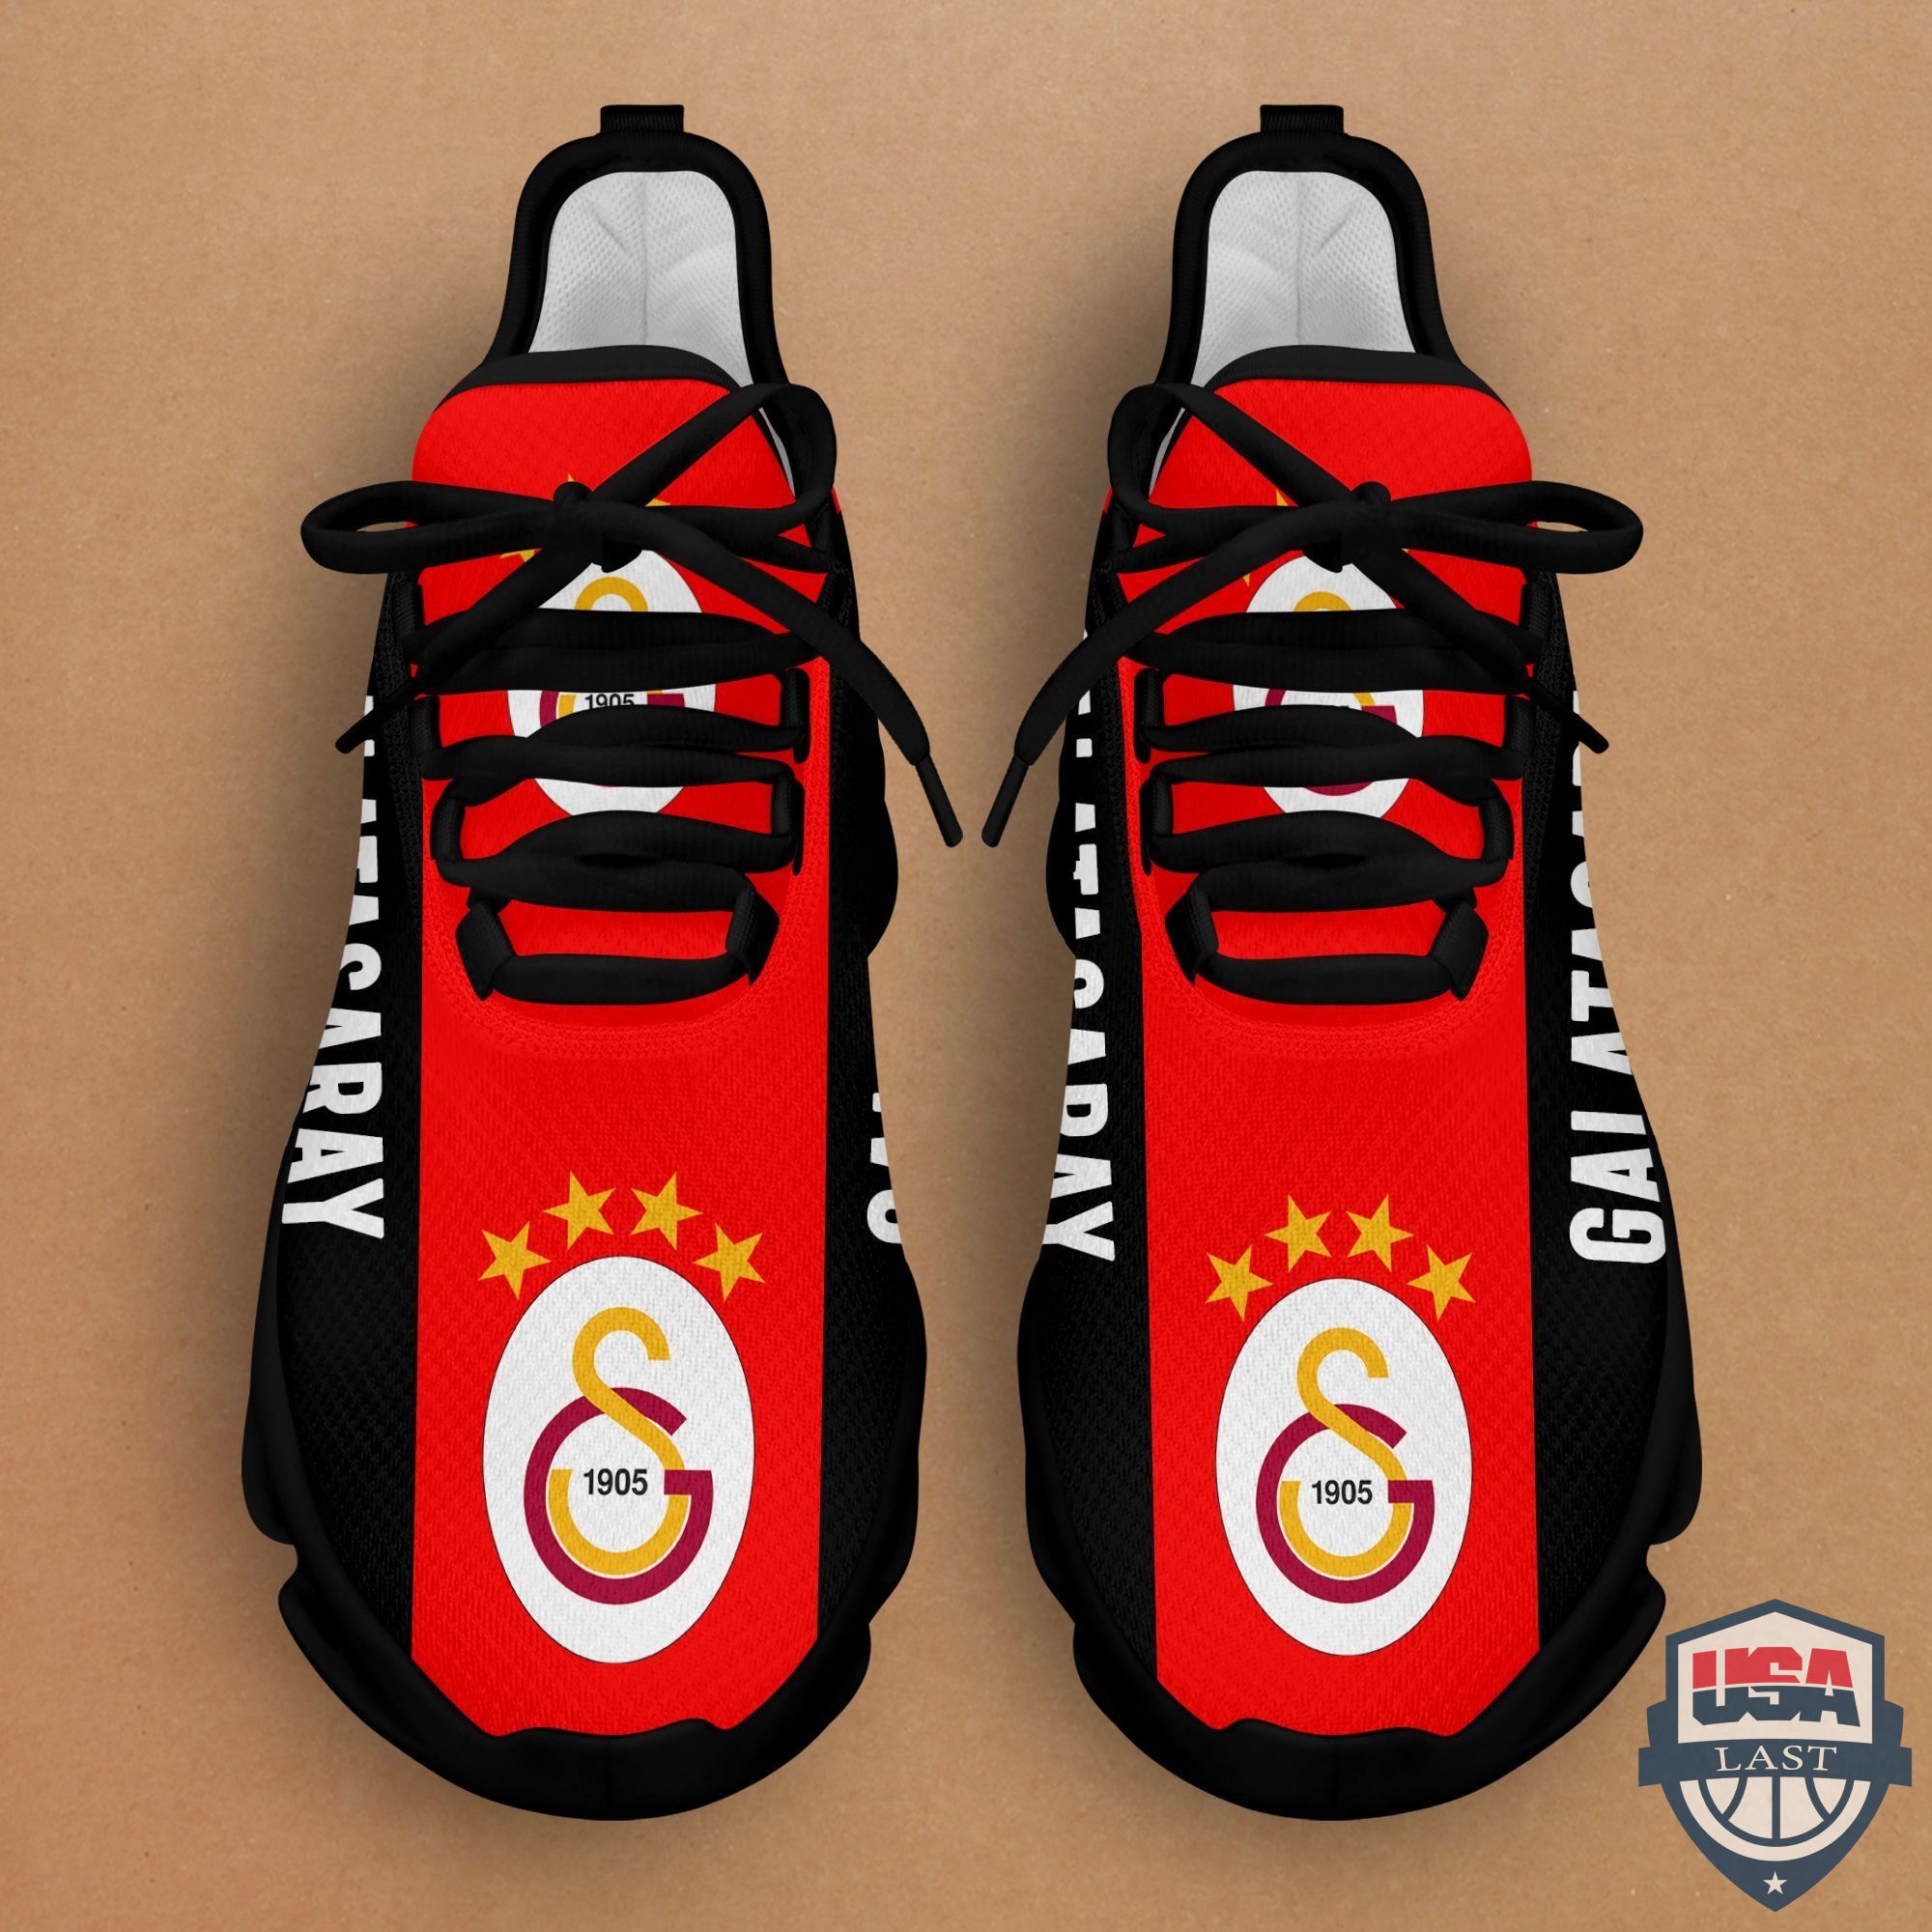 Top Trending – Galatasaray Sneaker Max Soul Shoes Red Version